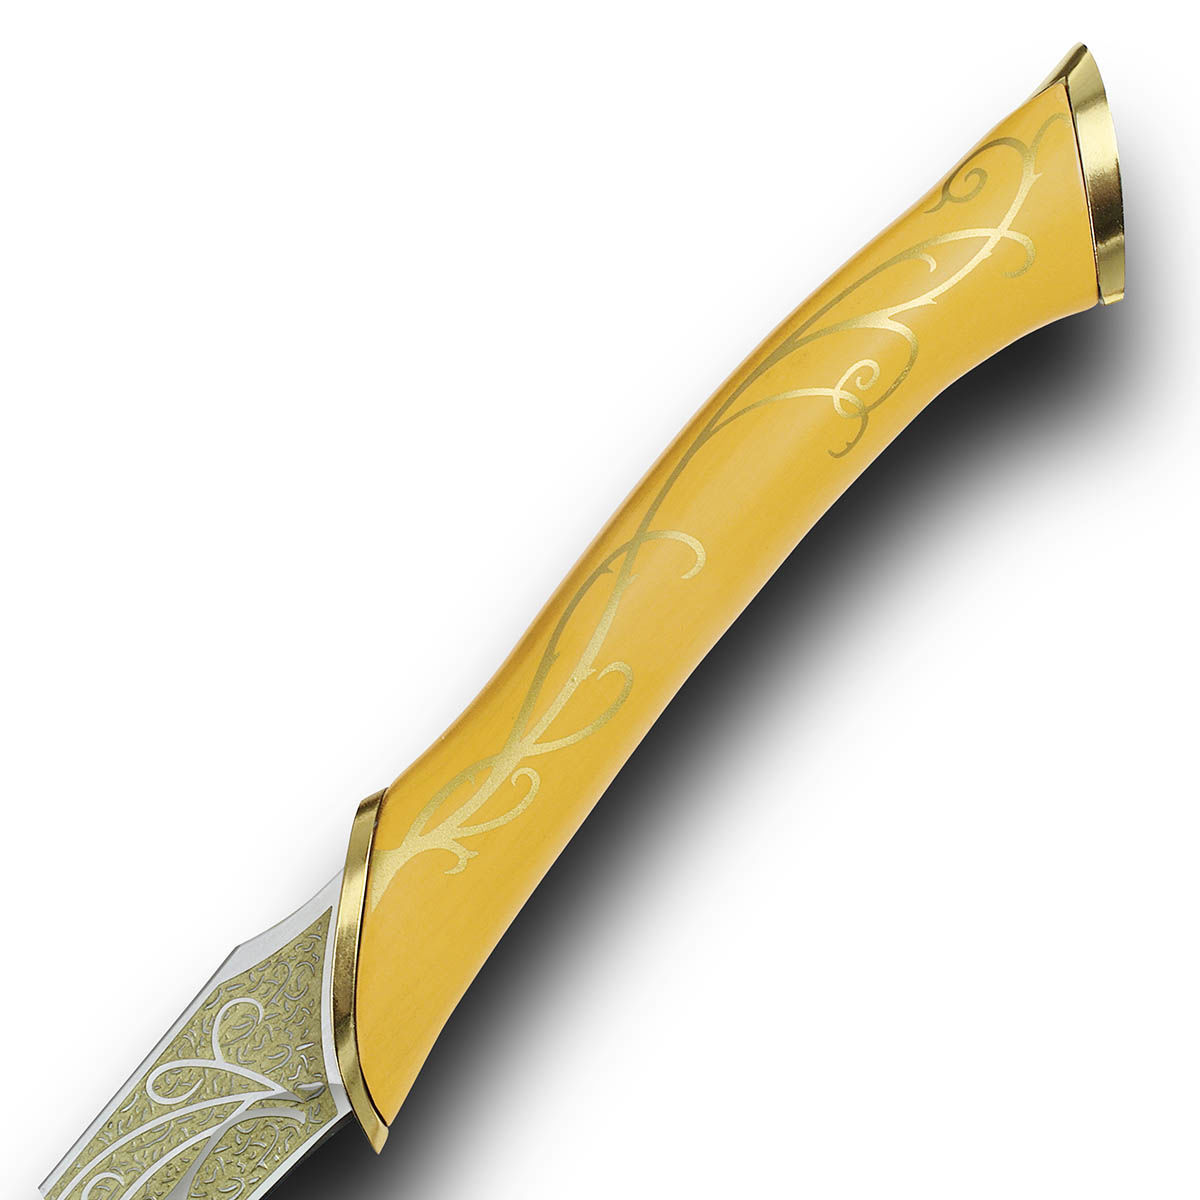 Officially Licensed Fighting Knives Of Legolas Greenleaf